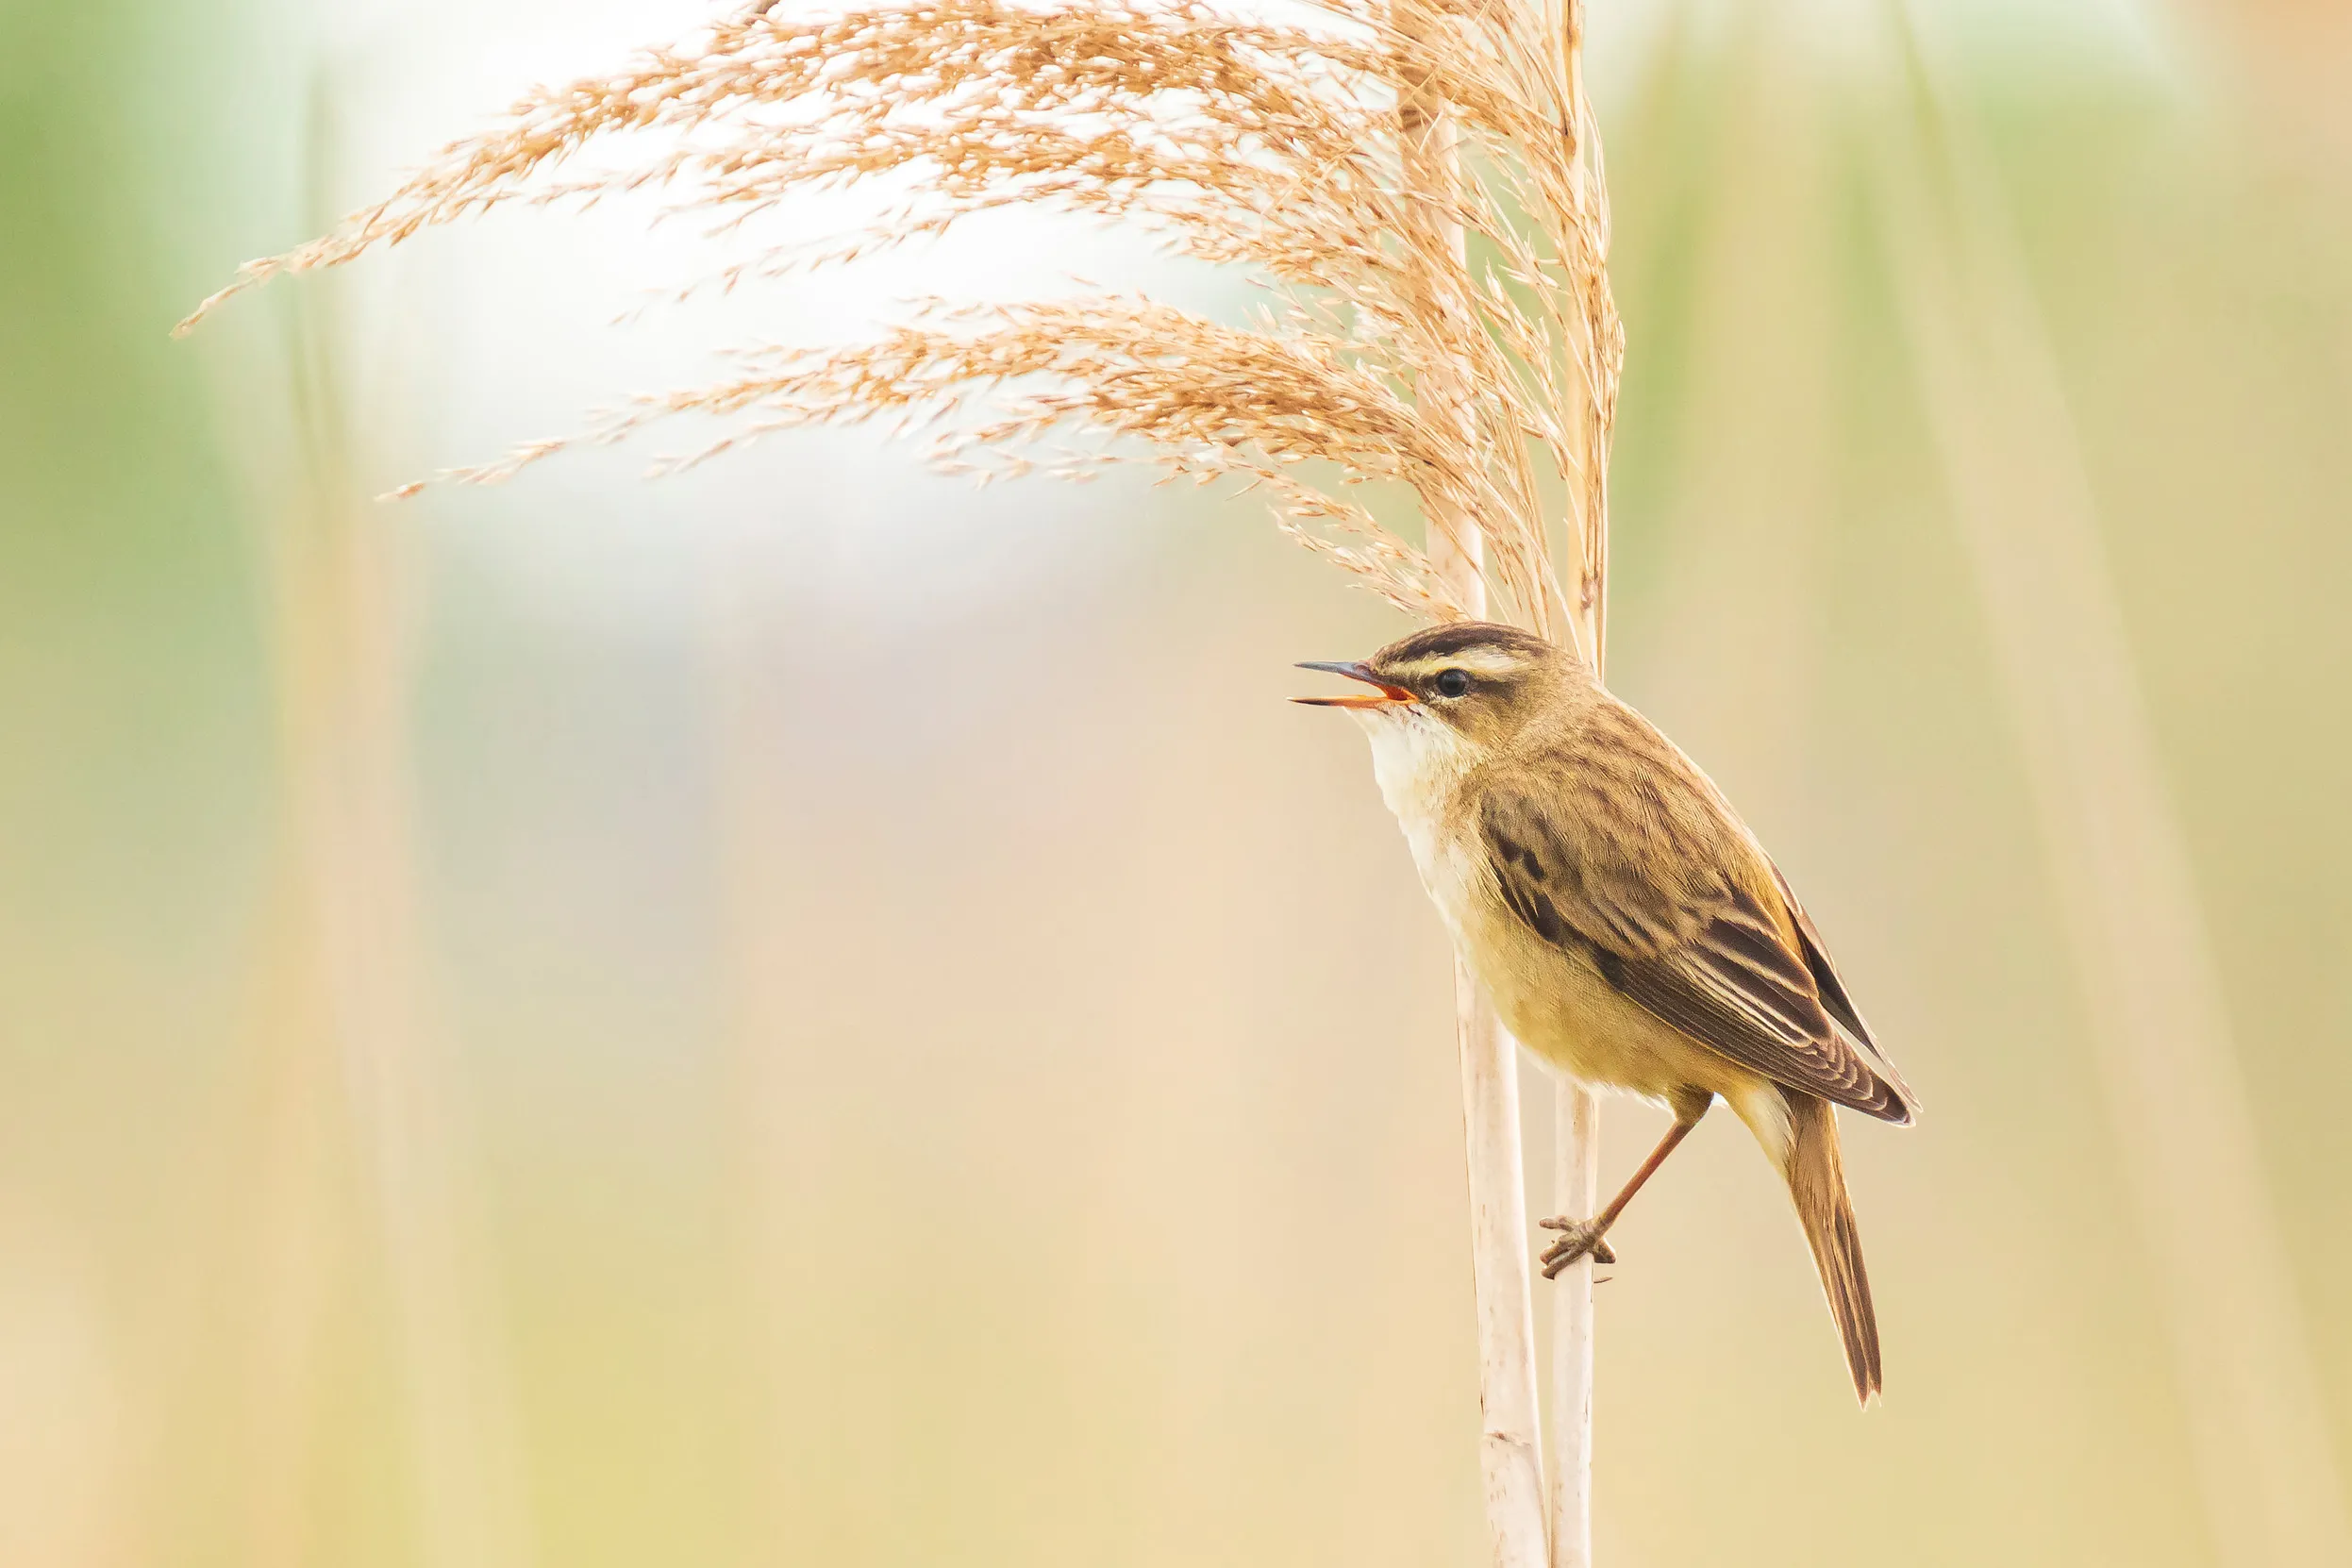 Lone Sedge Warbler perching on an upright reed with a blurry pastel background.